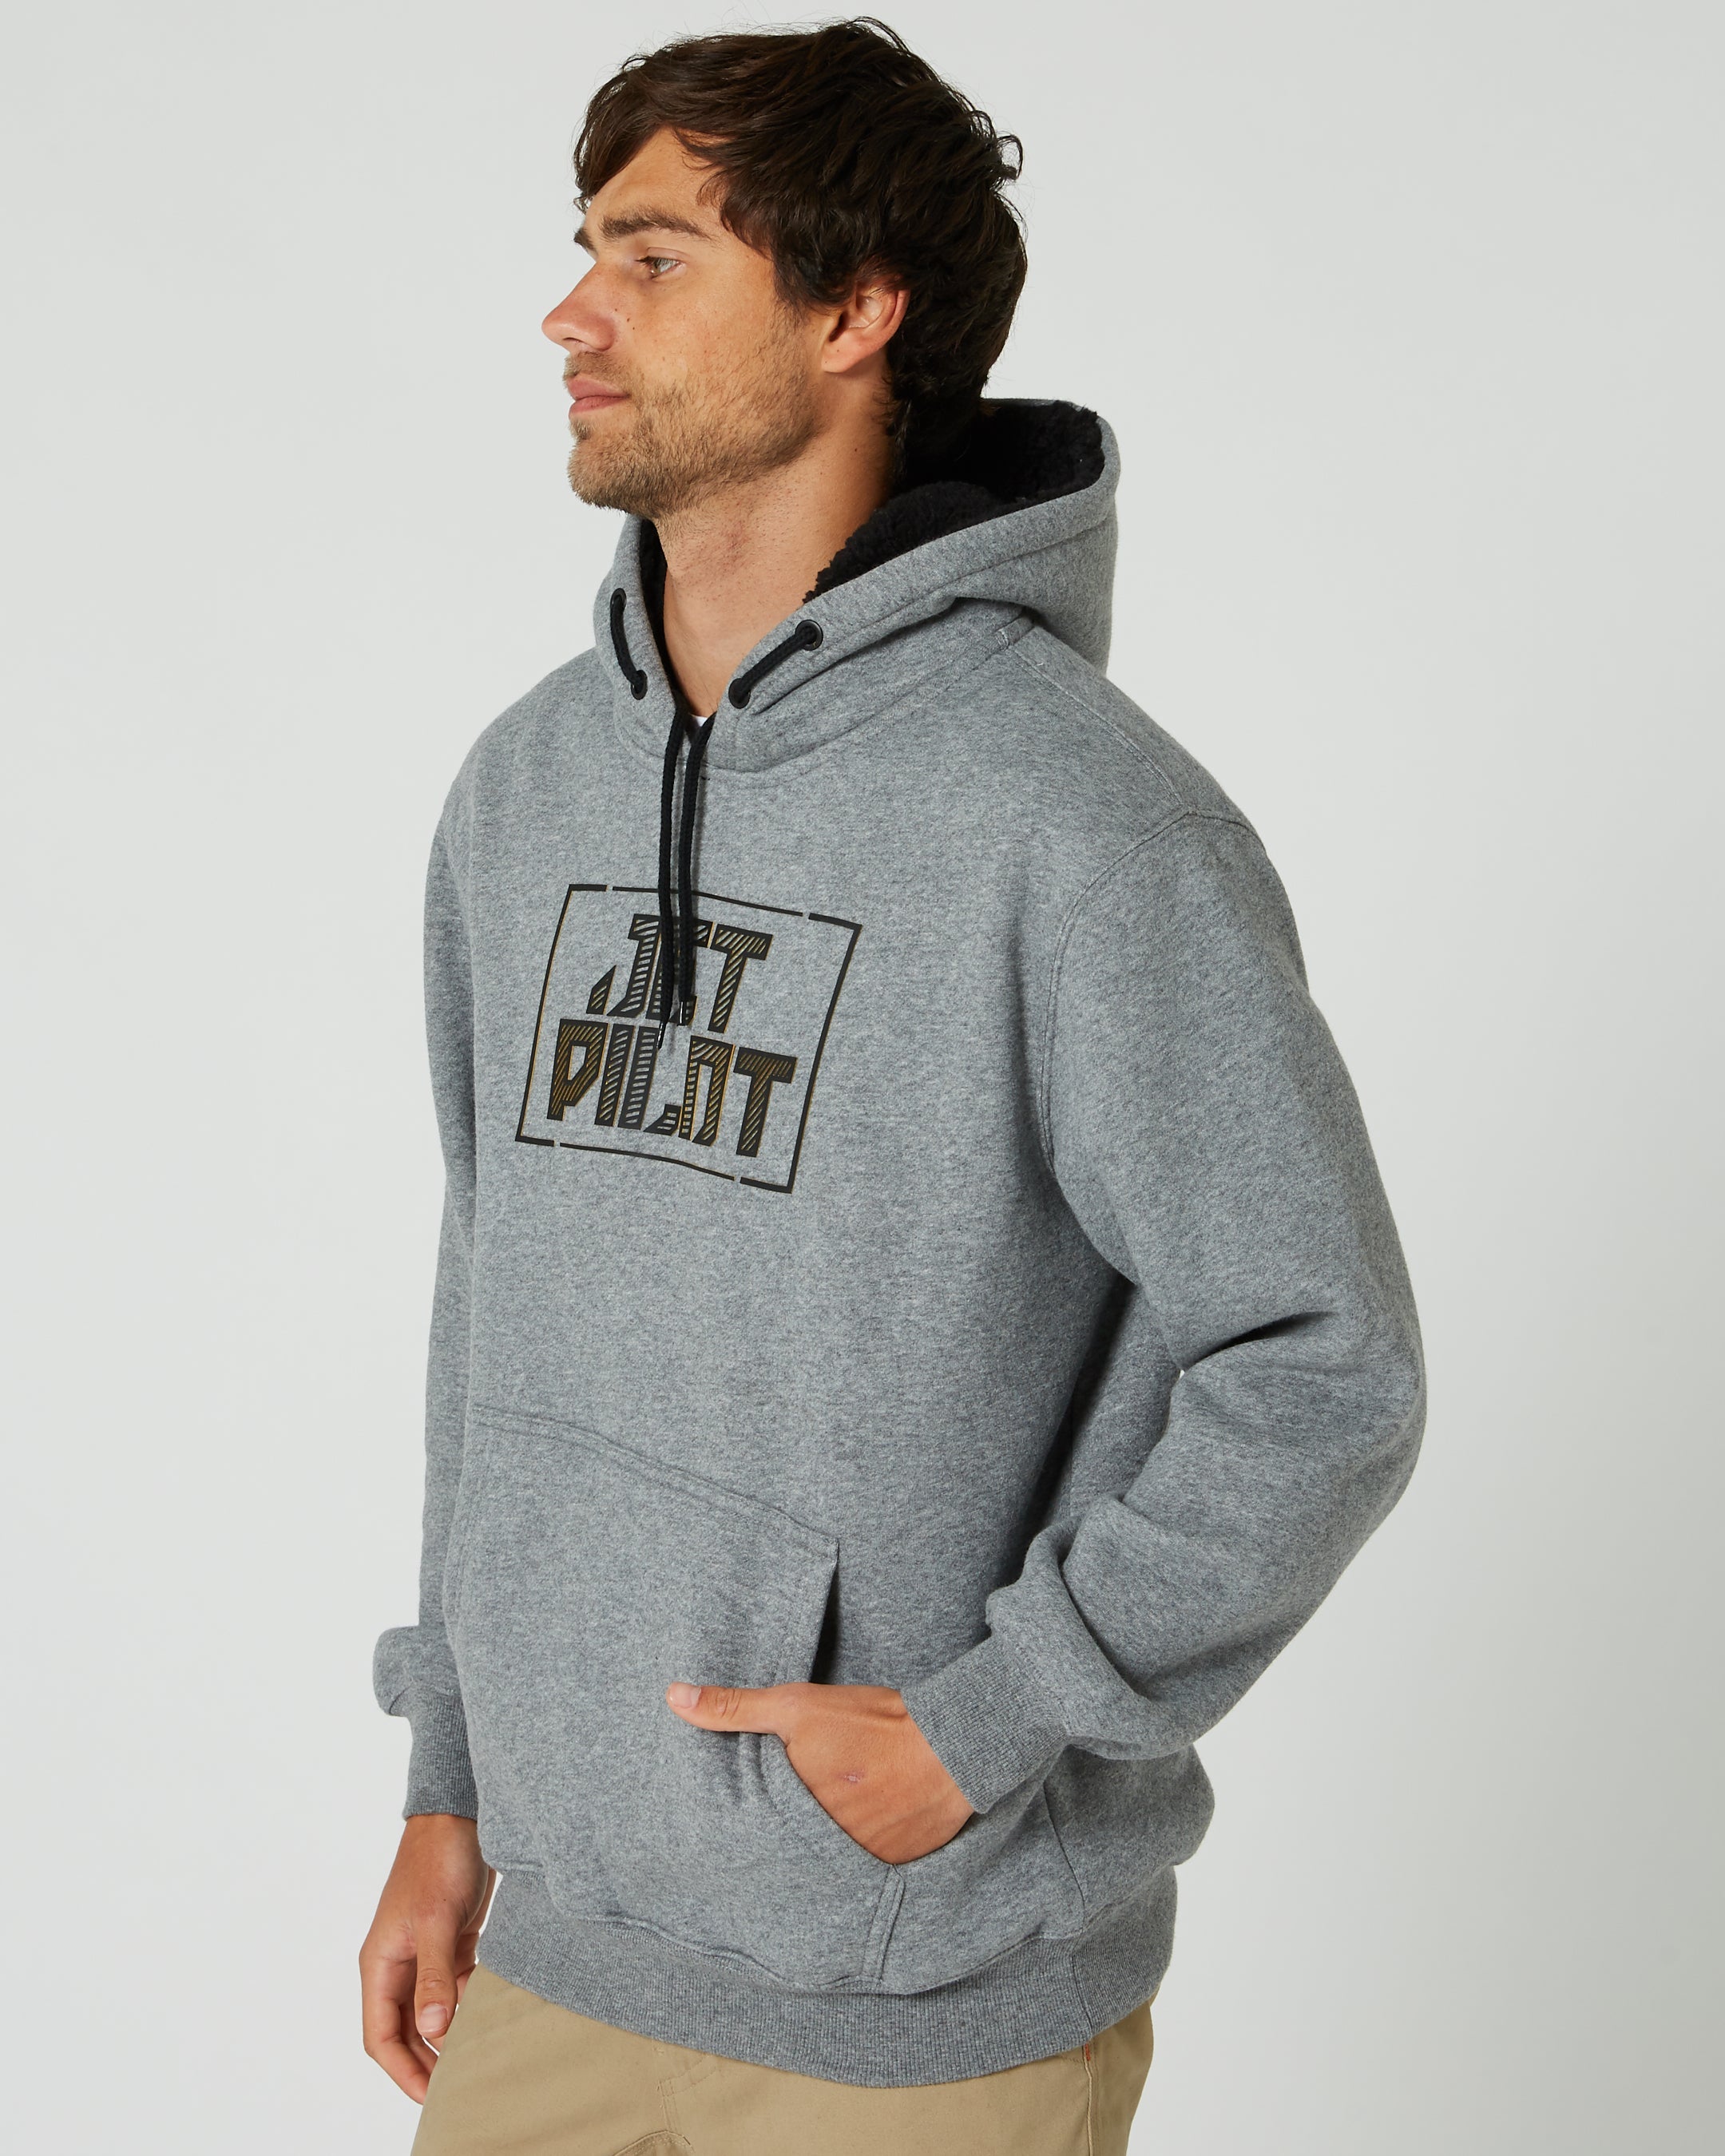 Jetpilot Corp HD Mens Pullover Hoodie - Charcoal 2